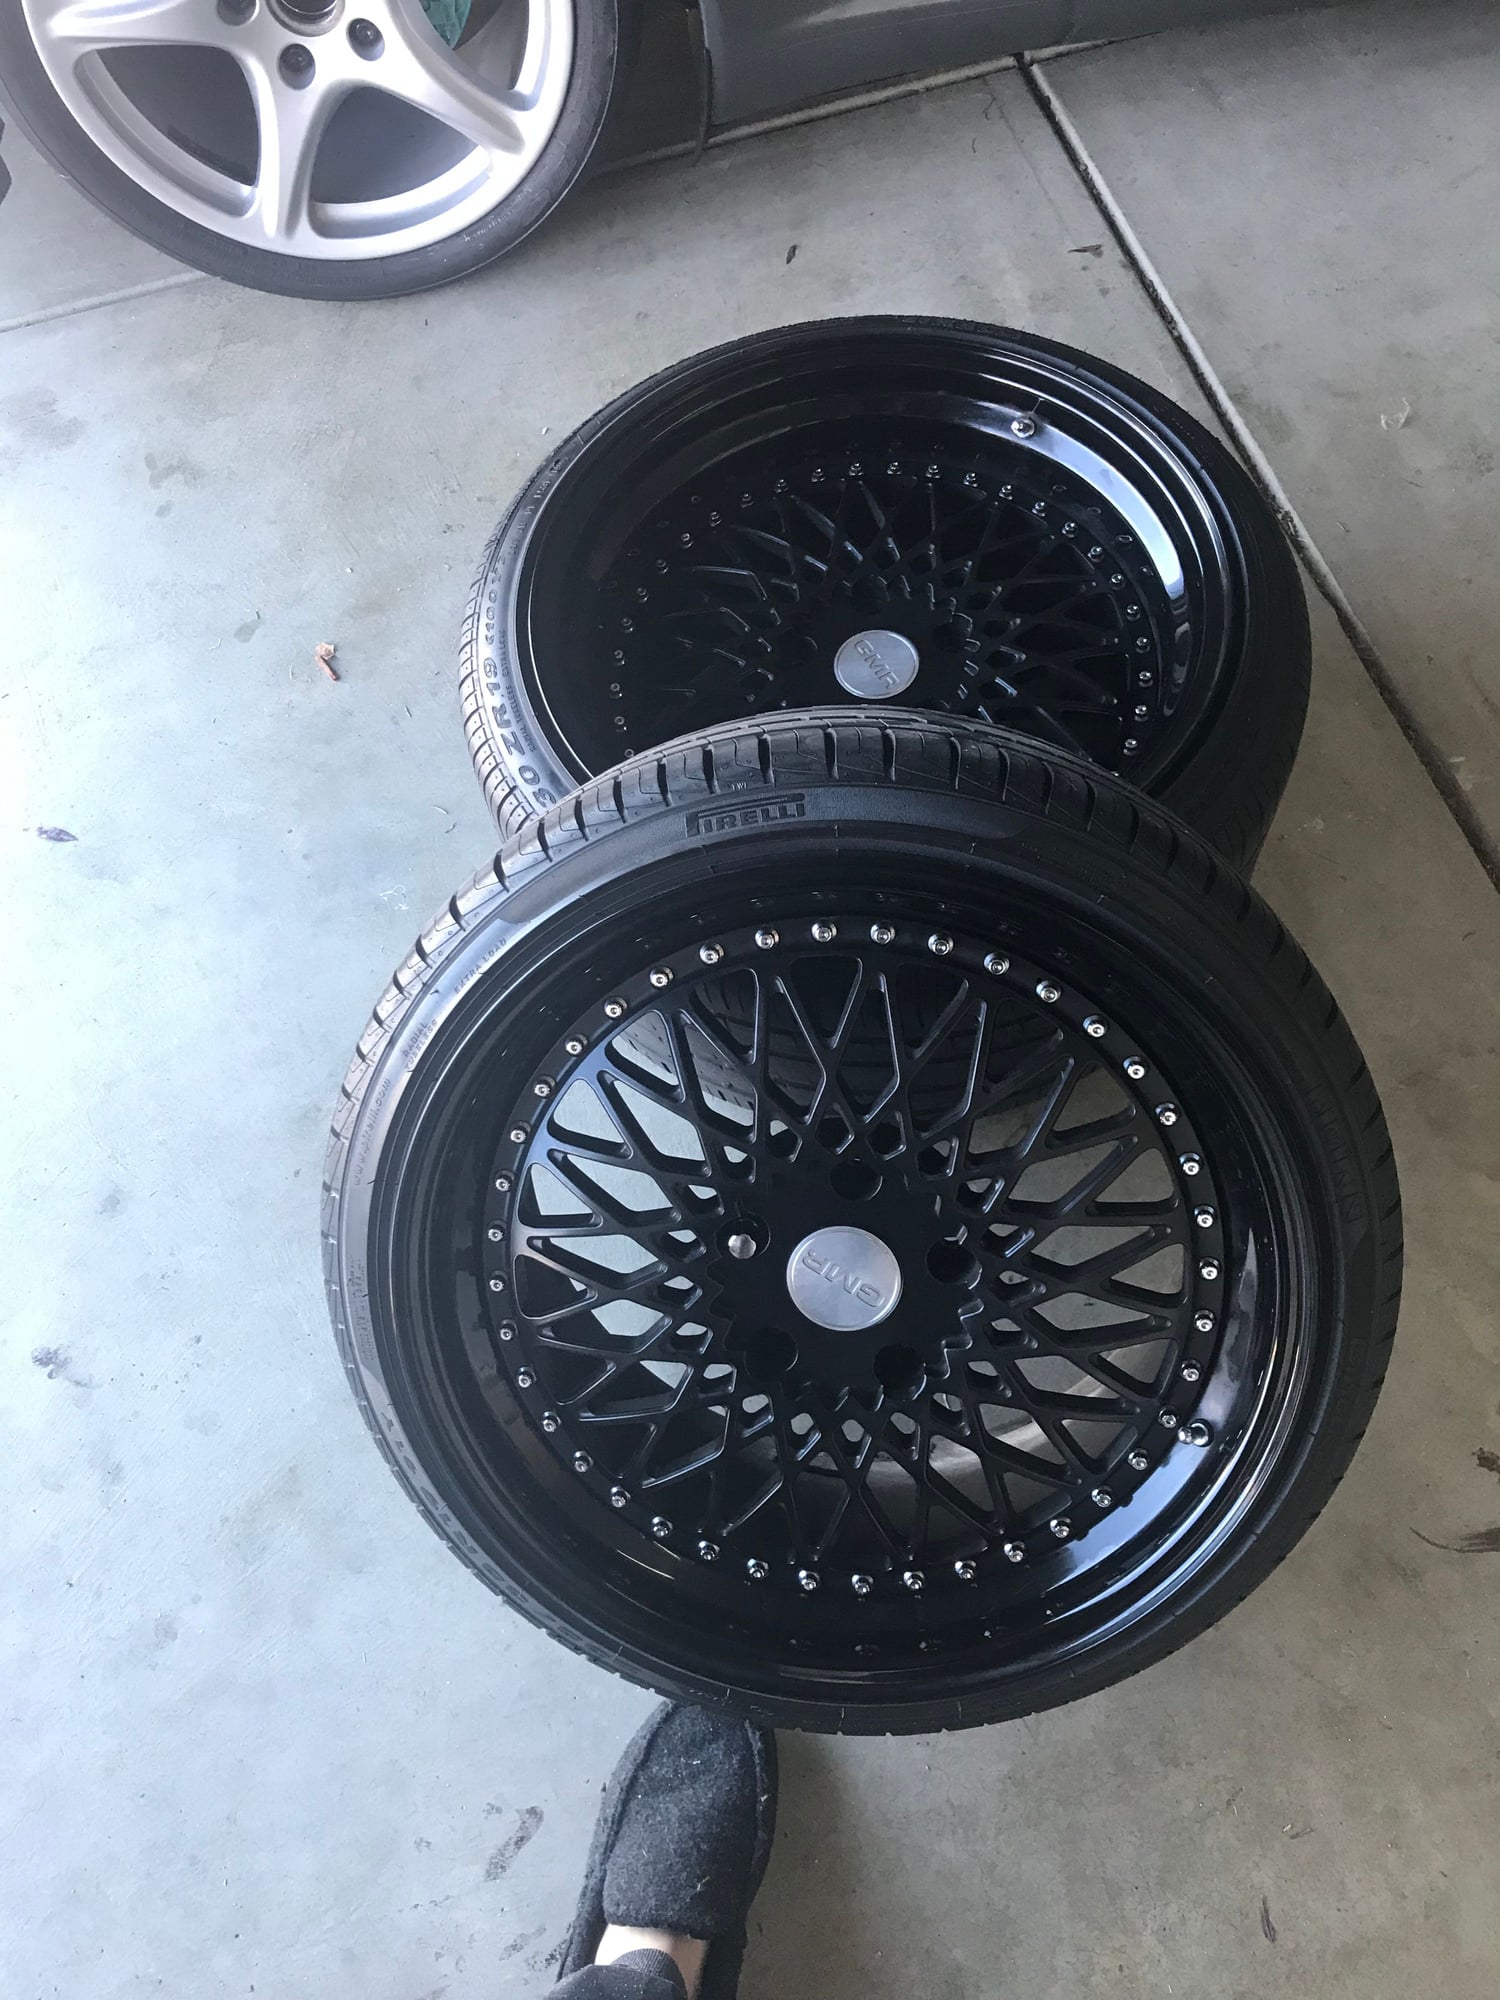 Wheels and Tires/Axles - Porsche Carrera GMR Wheels - $2500 - Used - 2005 to 2019 Porsche Carrera - Palmdale, CA 93551, United States